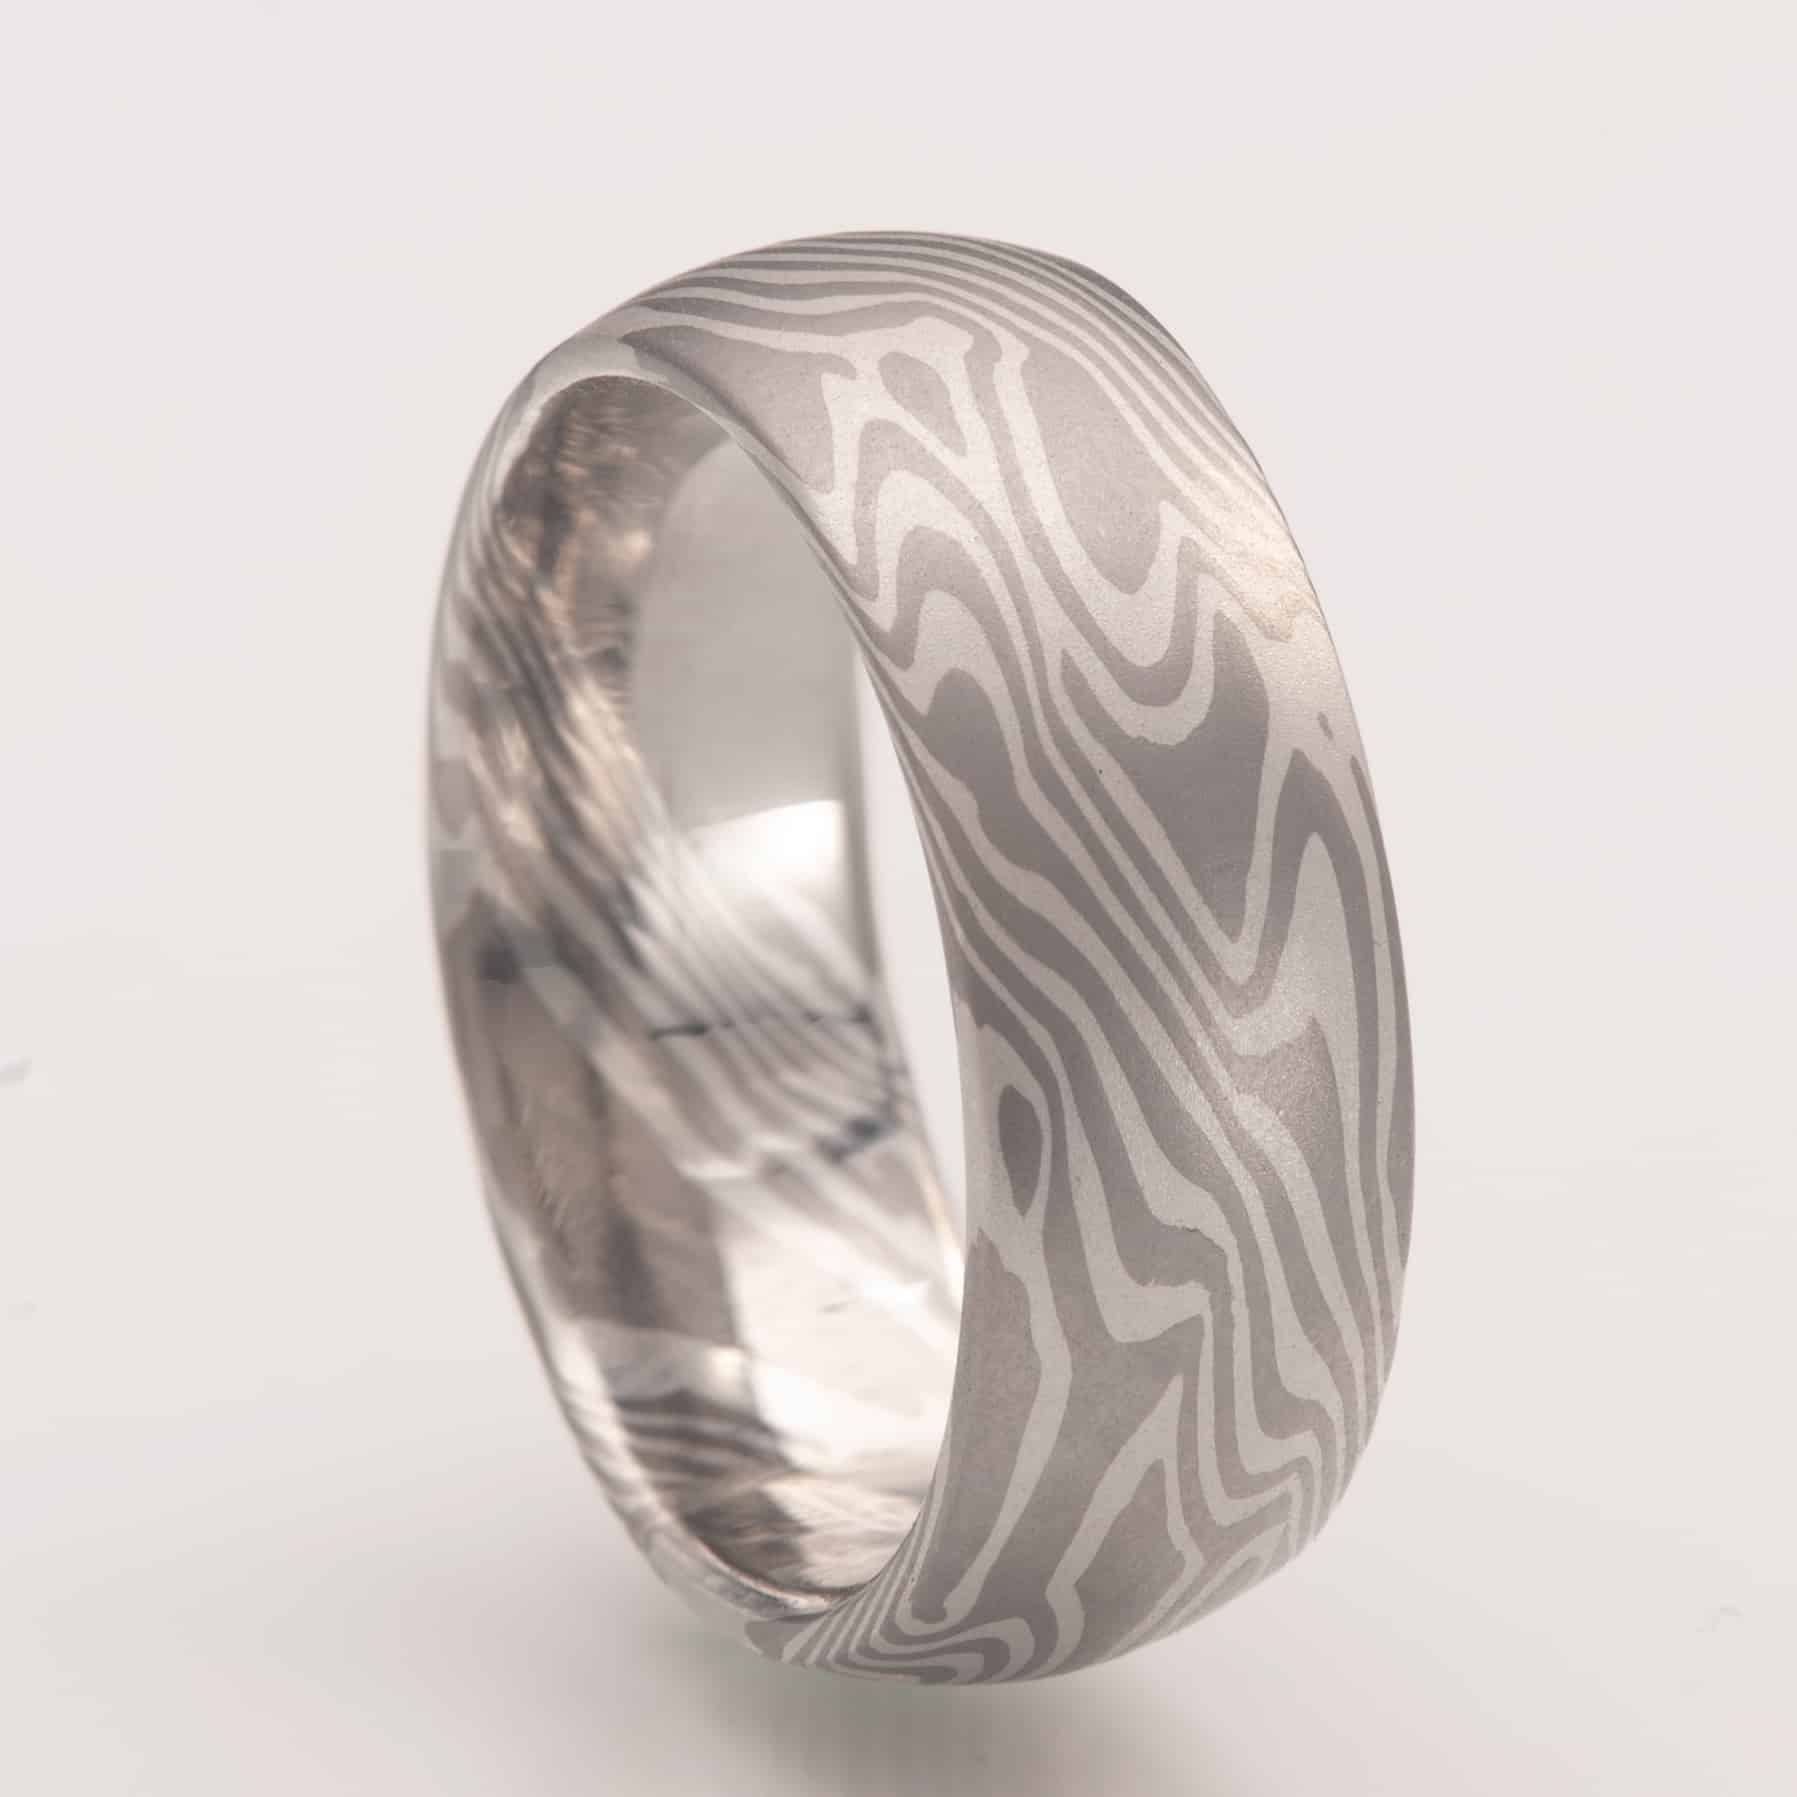 The Best Metal for A Wedding Ring